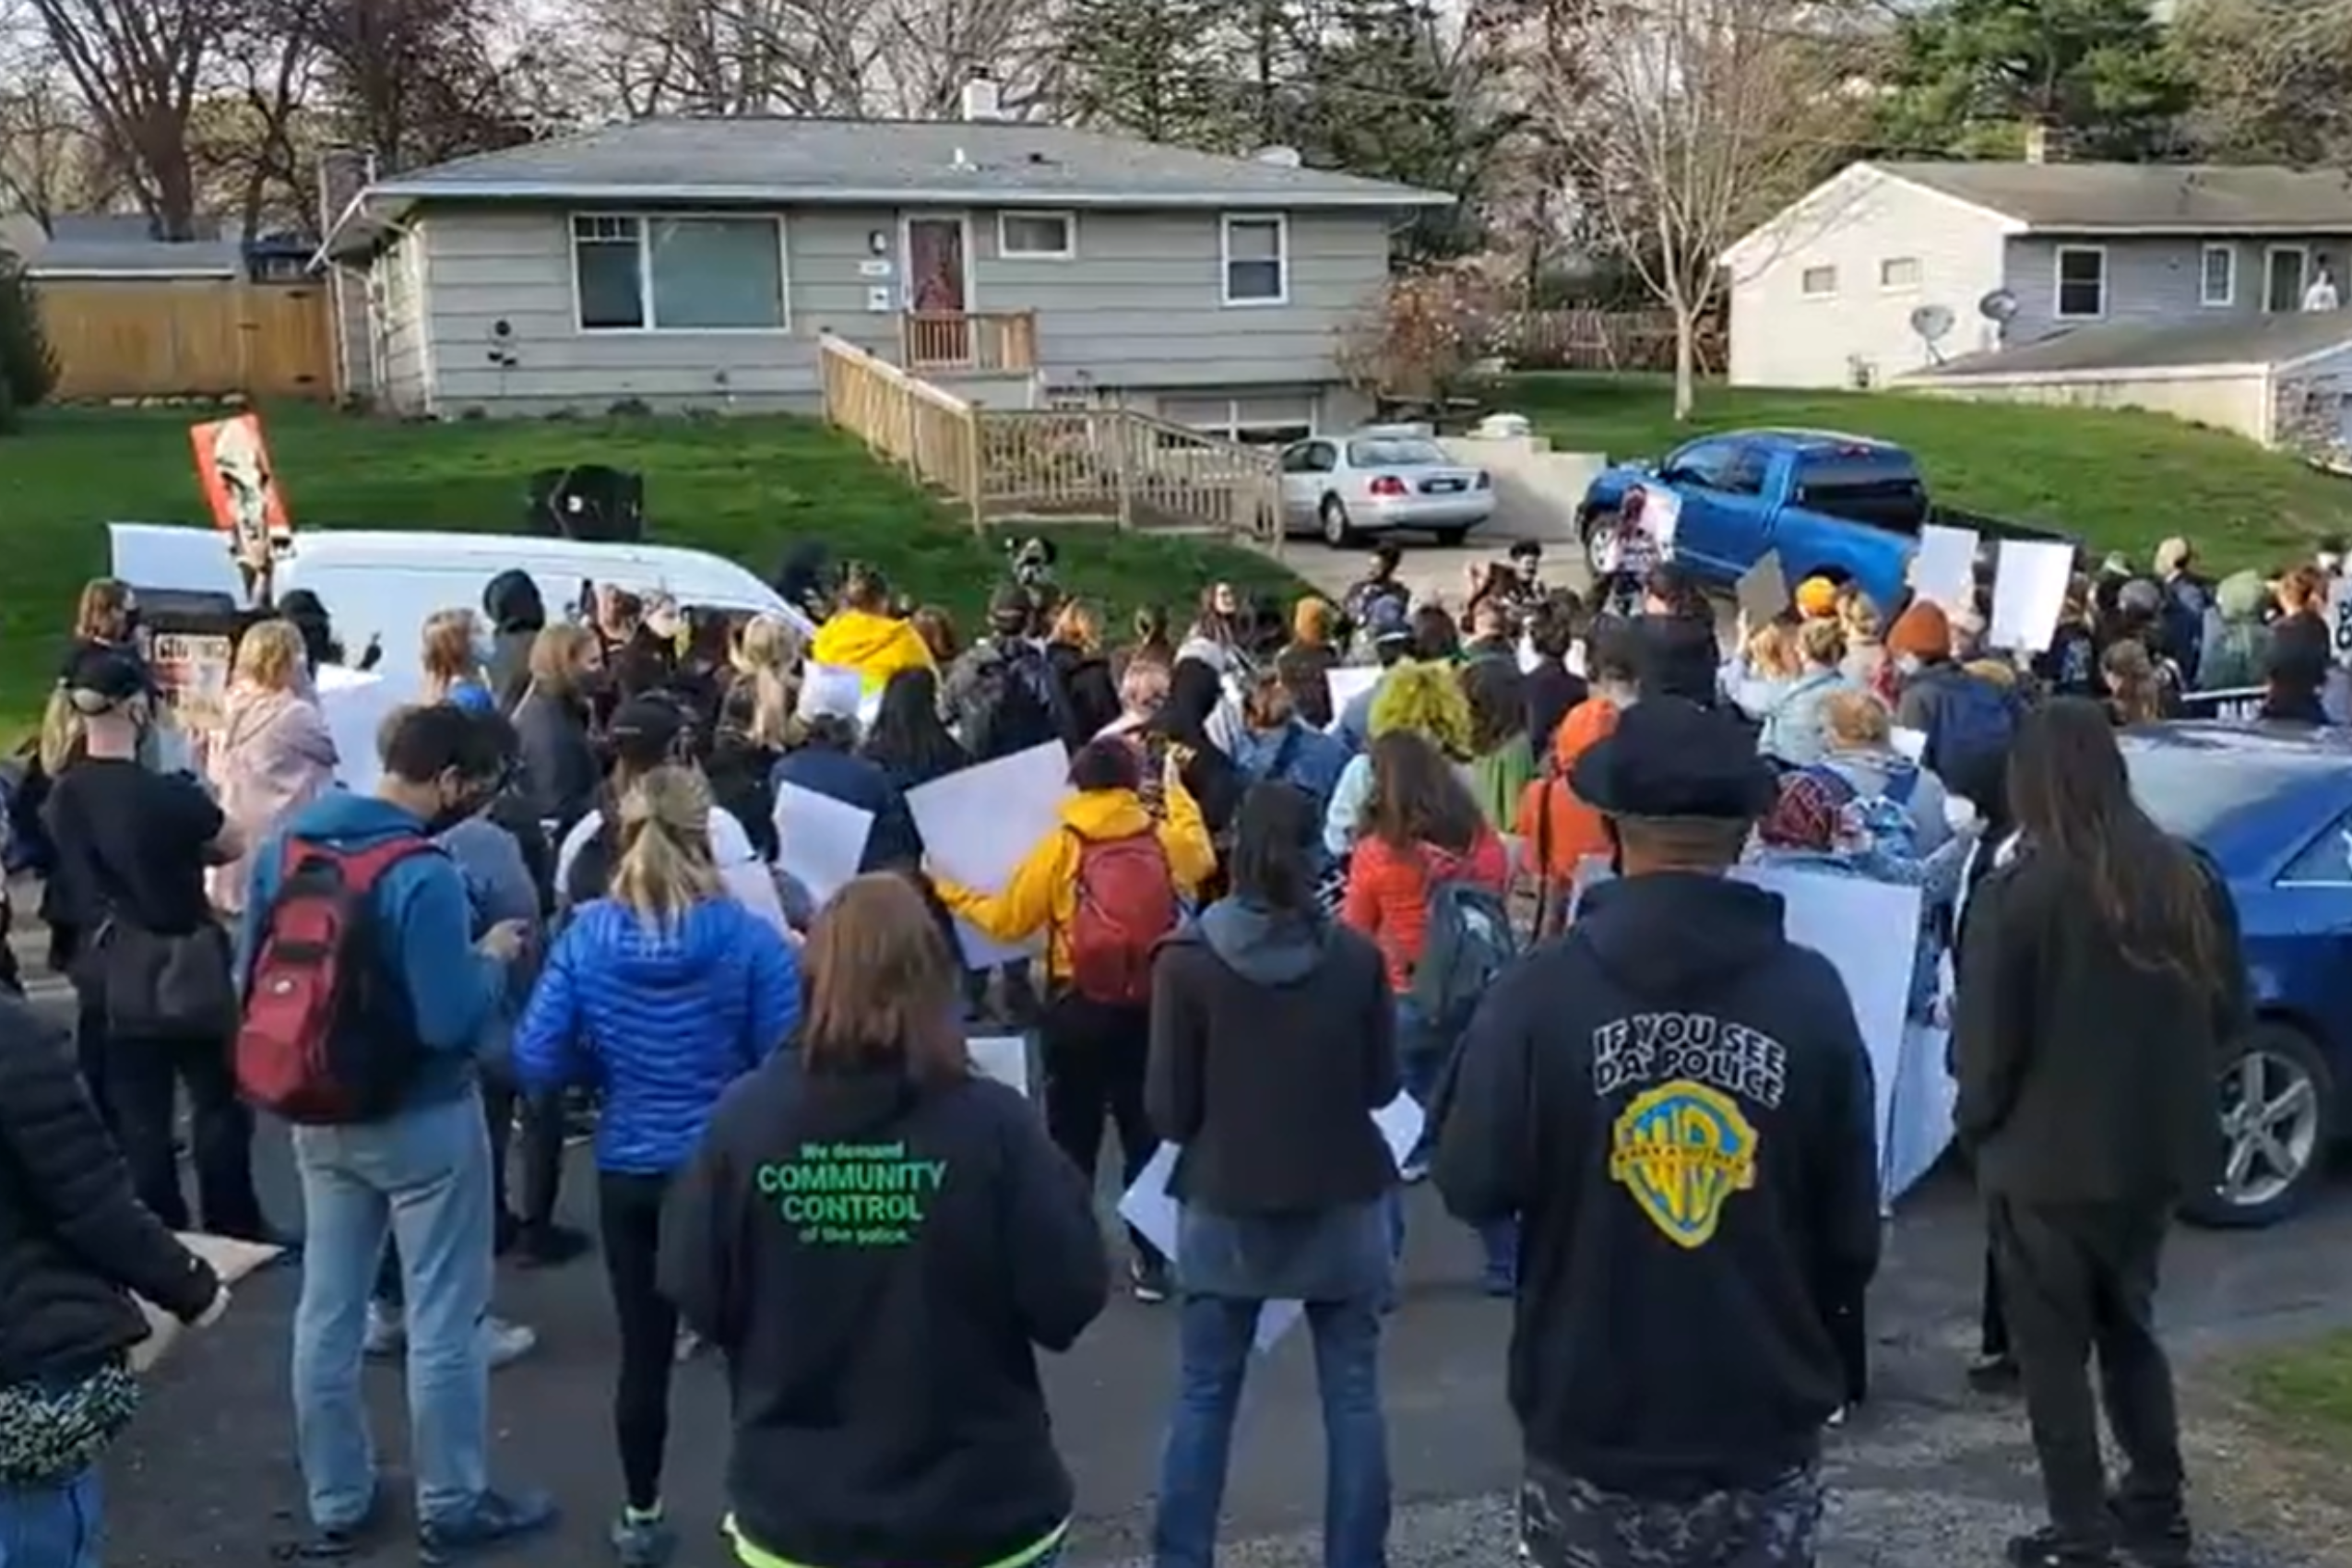 A group of protestors listen to a speech outside the home of the Washington County Attorney. (Image source: Facebook/BackLives-Media)